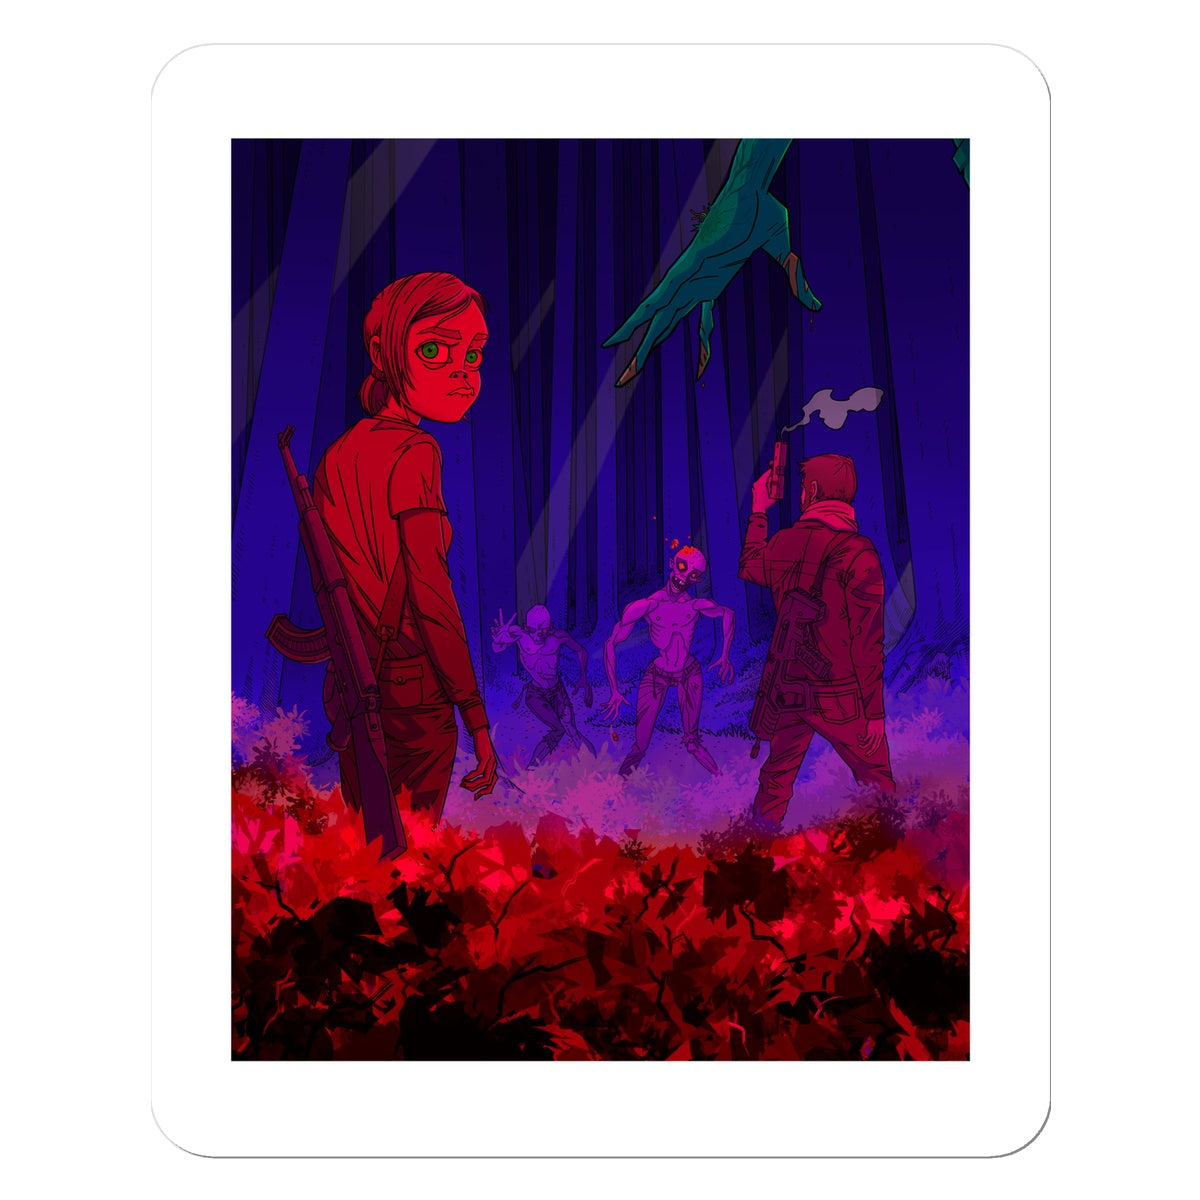 Unique and cool Gorillaz-style zombie game sticker illustration